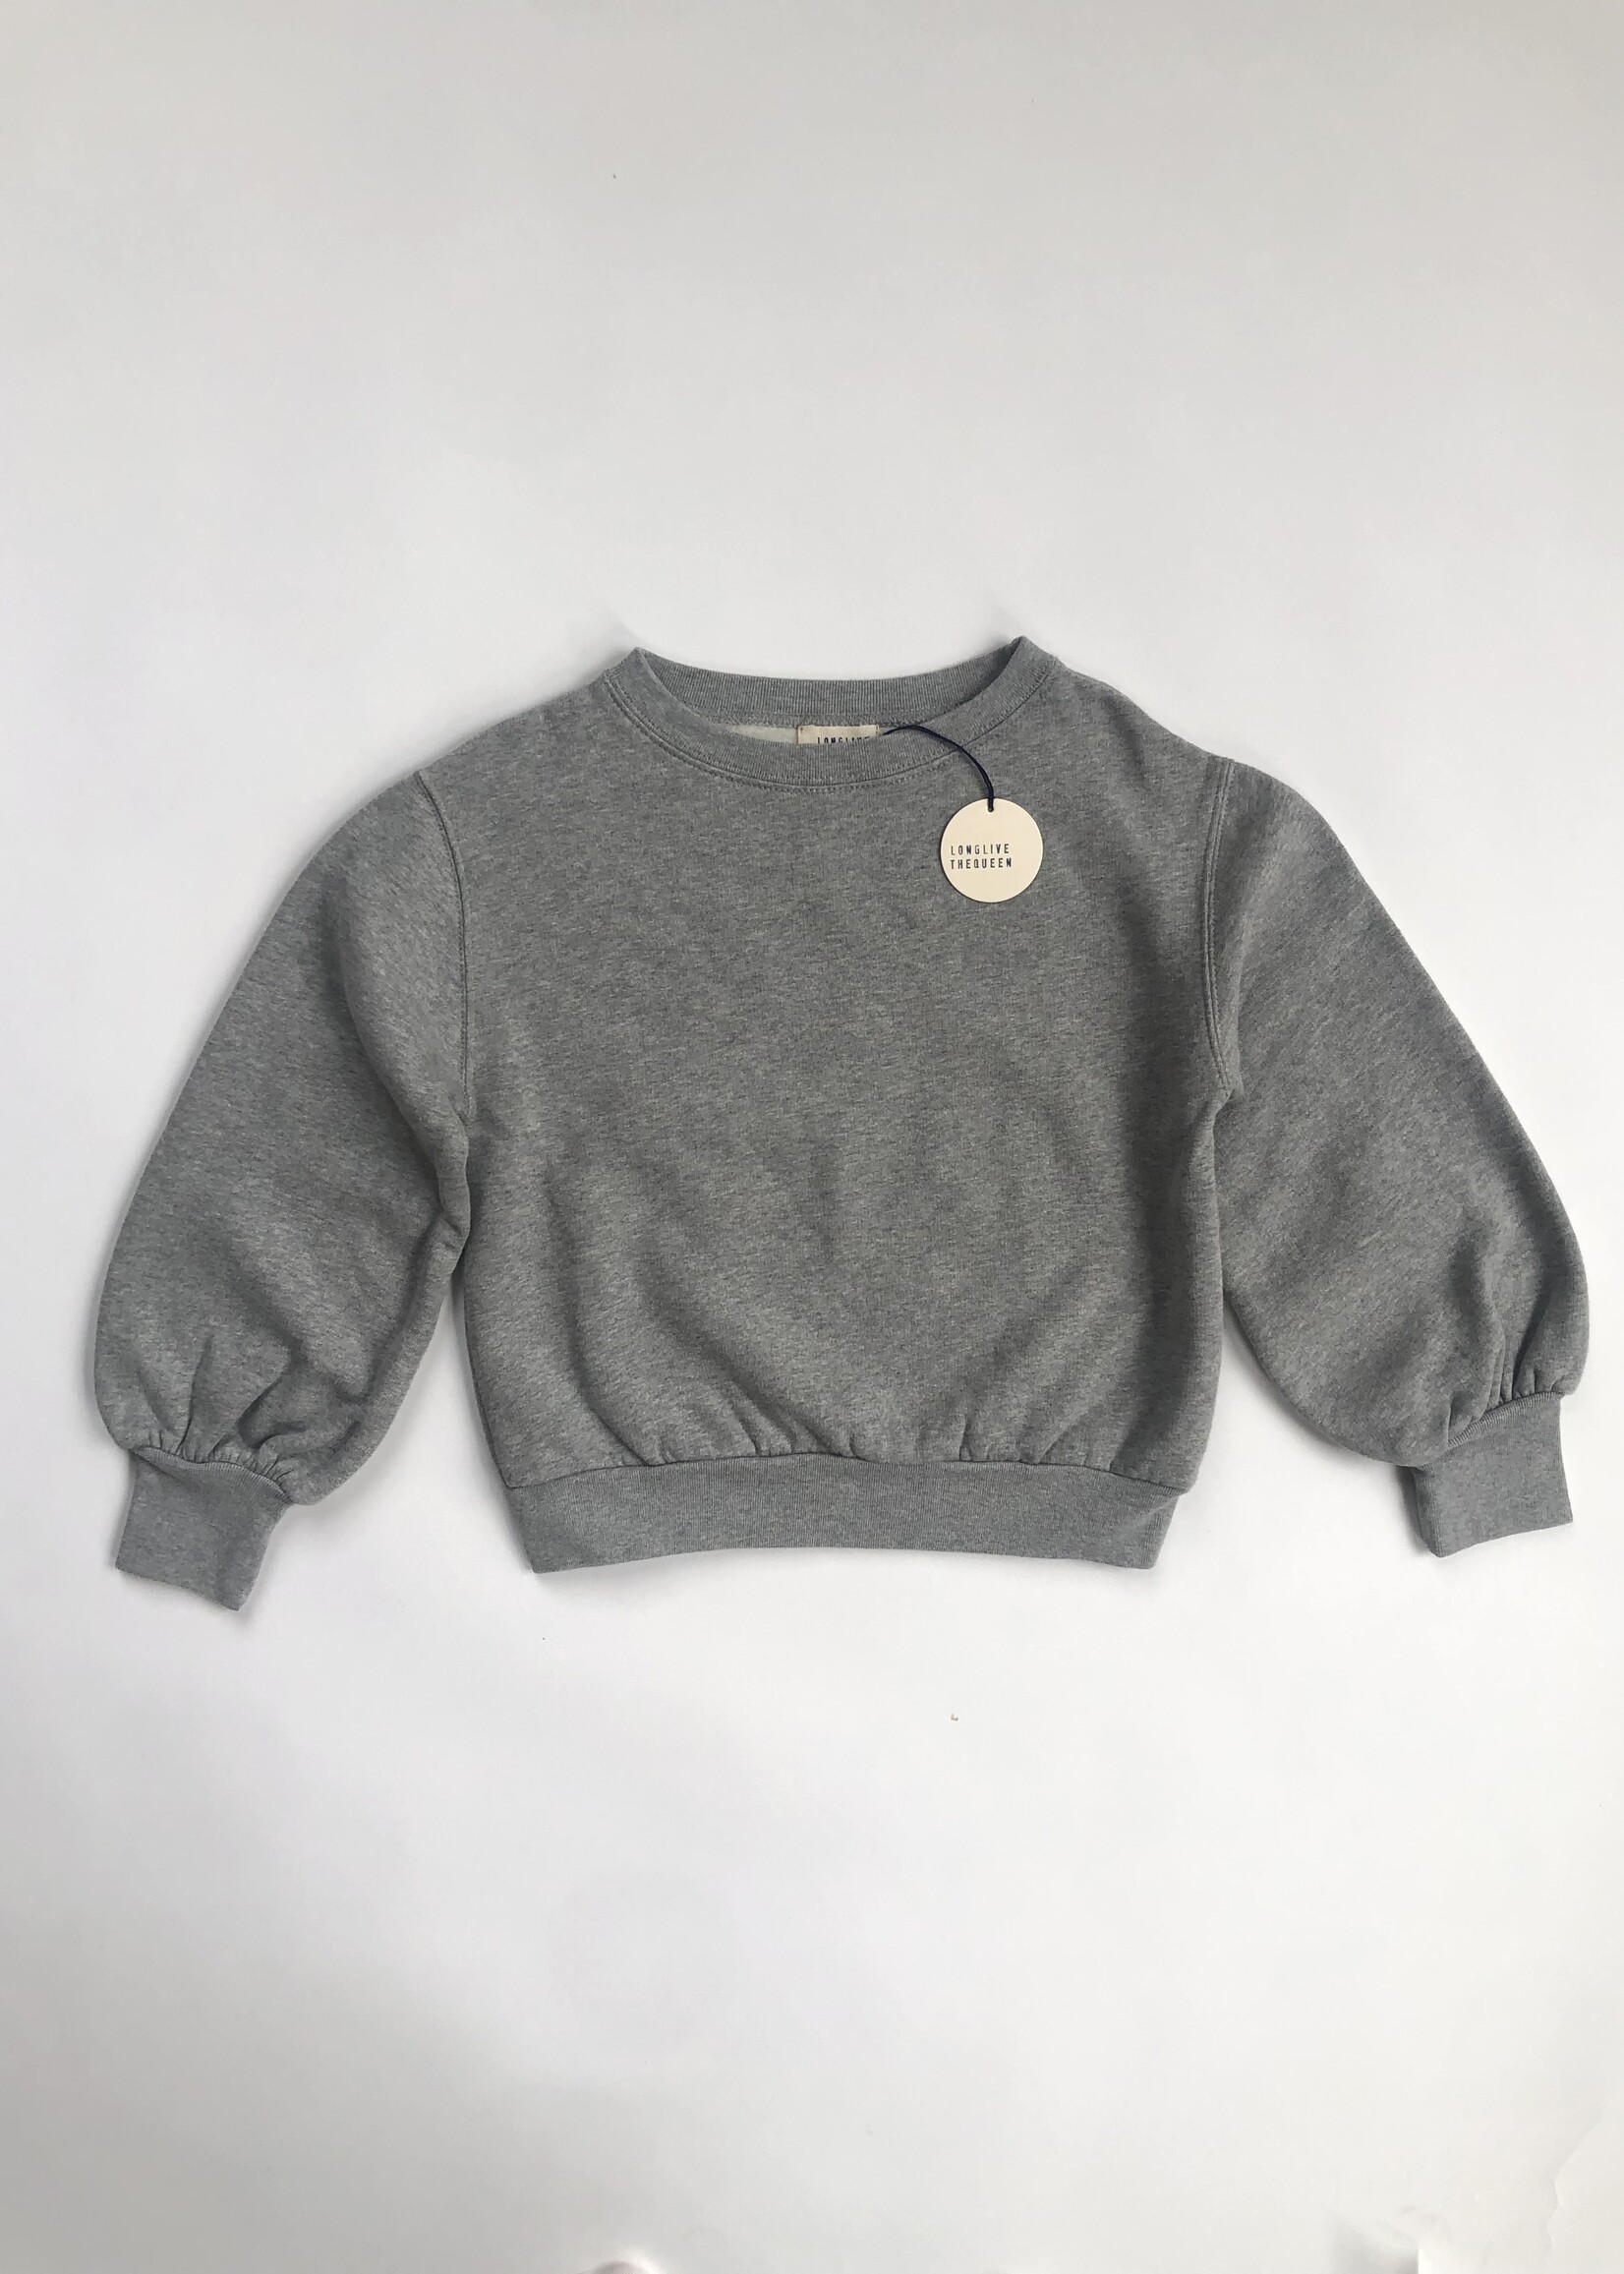 Long Live The Queen Grey sweater 6-8Y